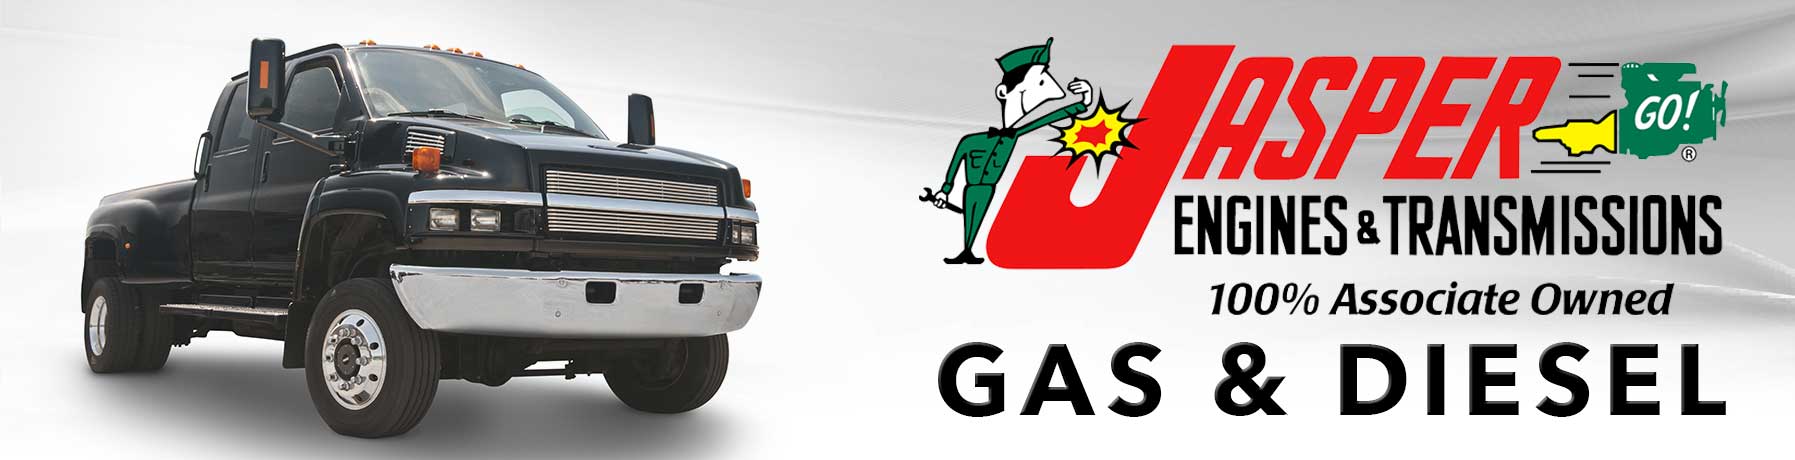 Jasper Engines and Transmissions 100% Associate Owned Gas and Diesel